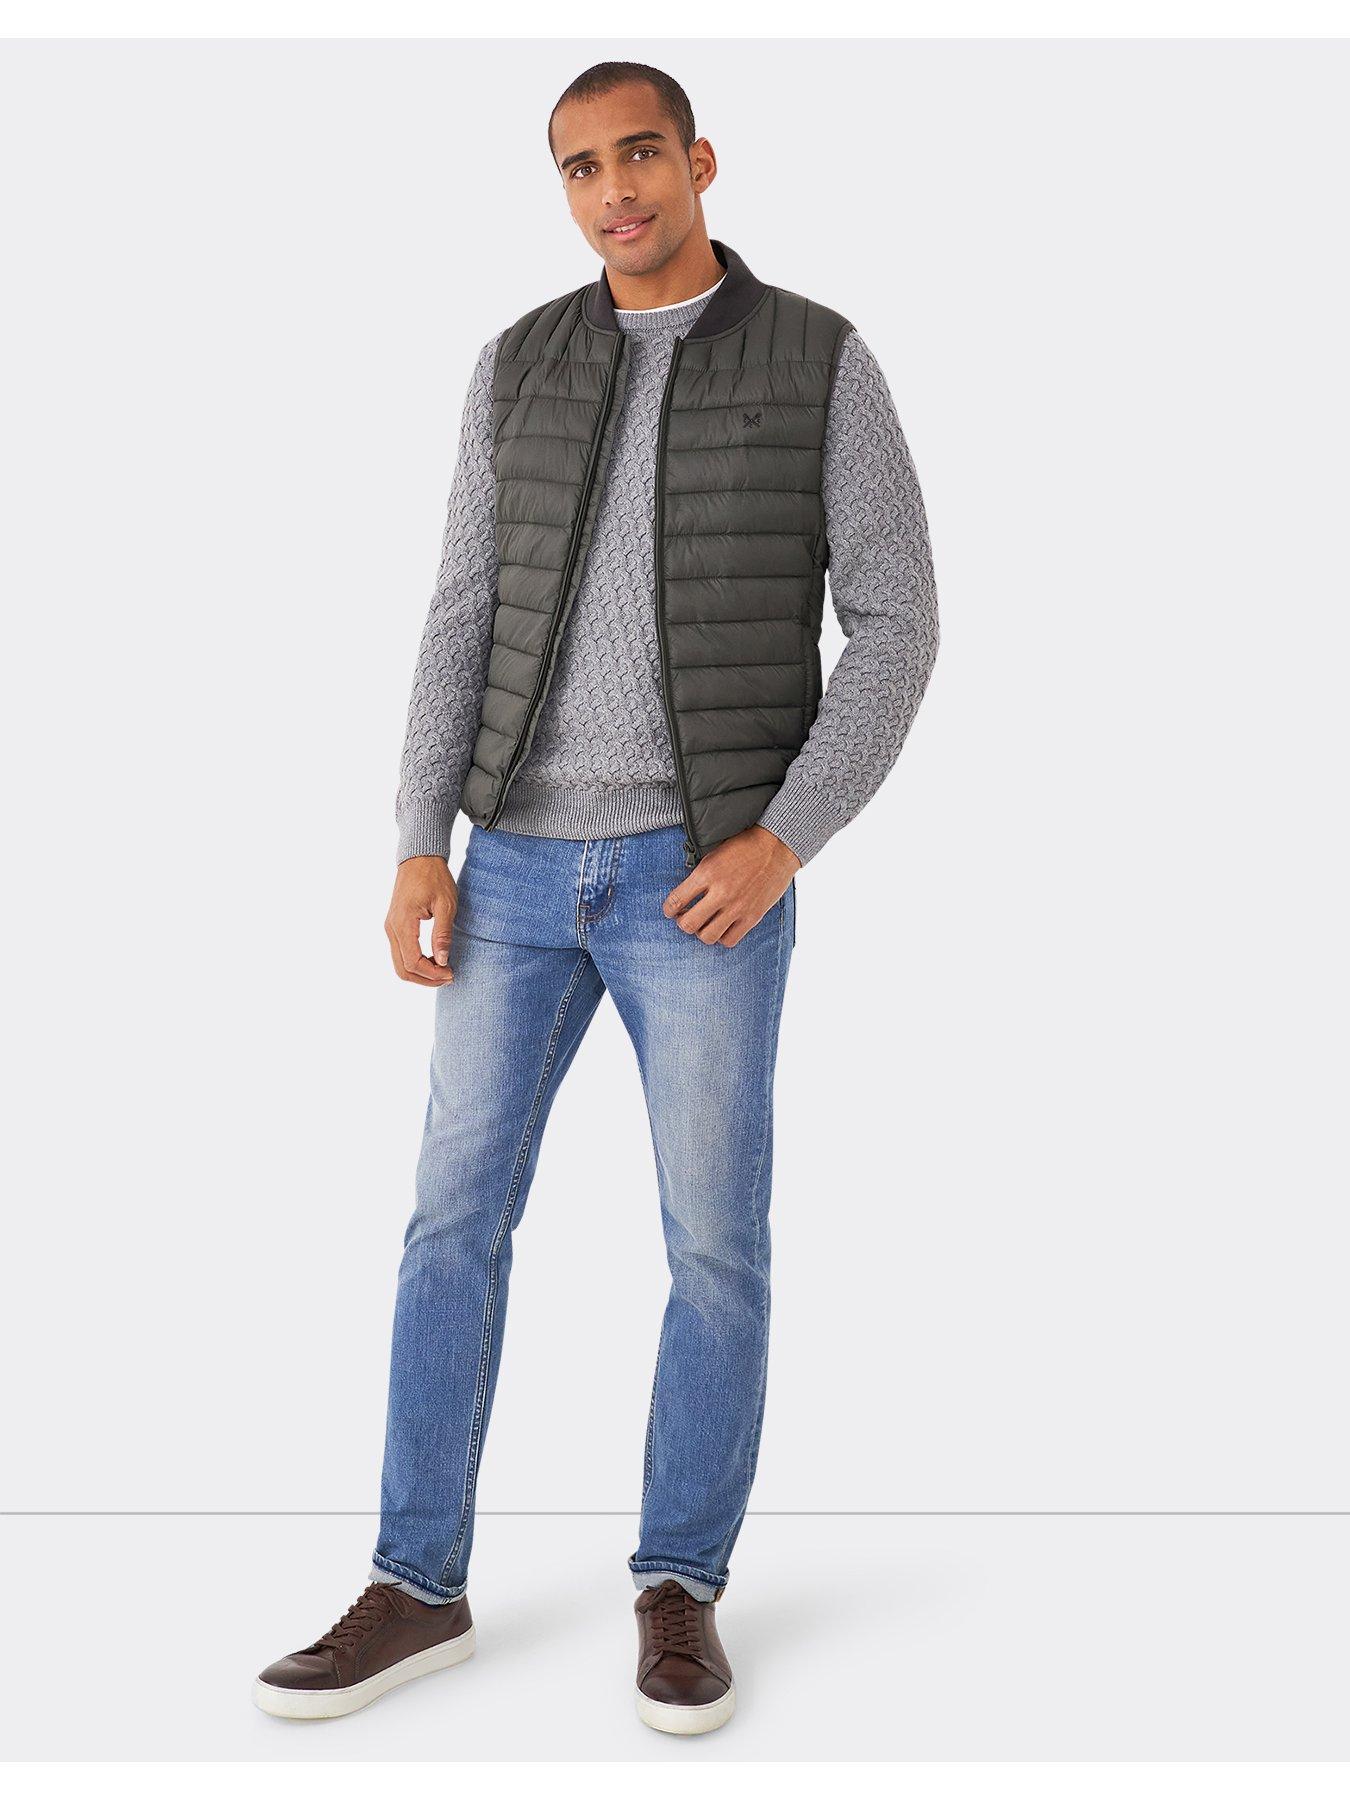  Lightweight Lowther Gilet